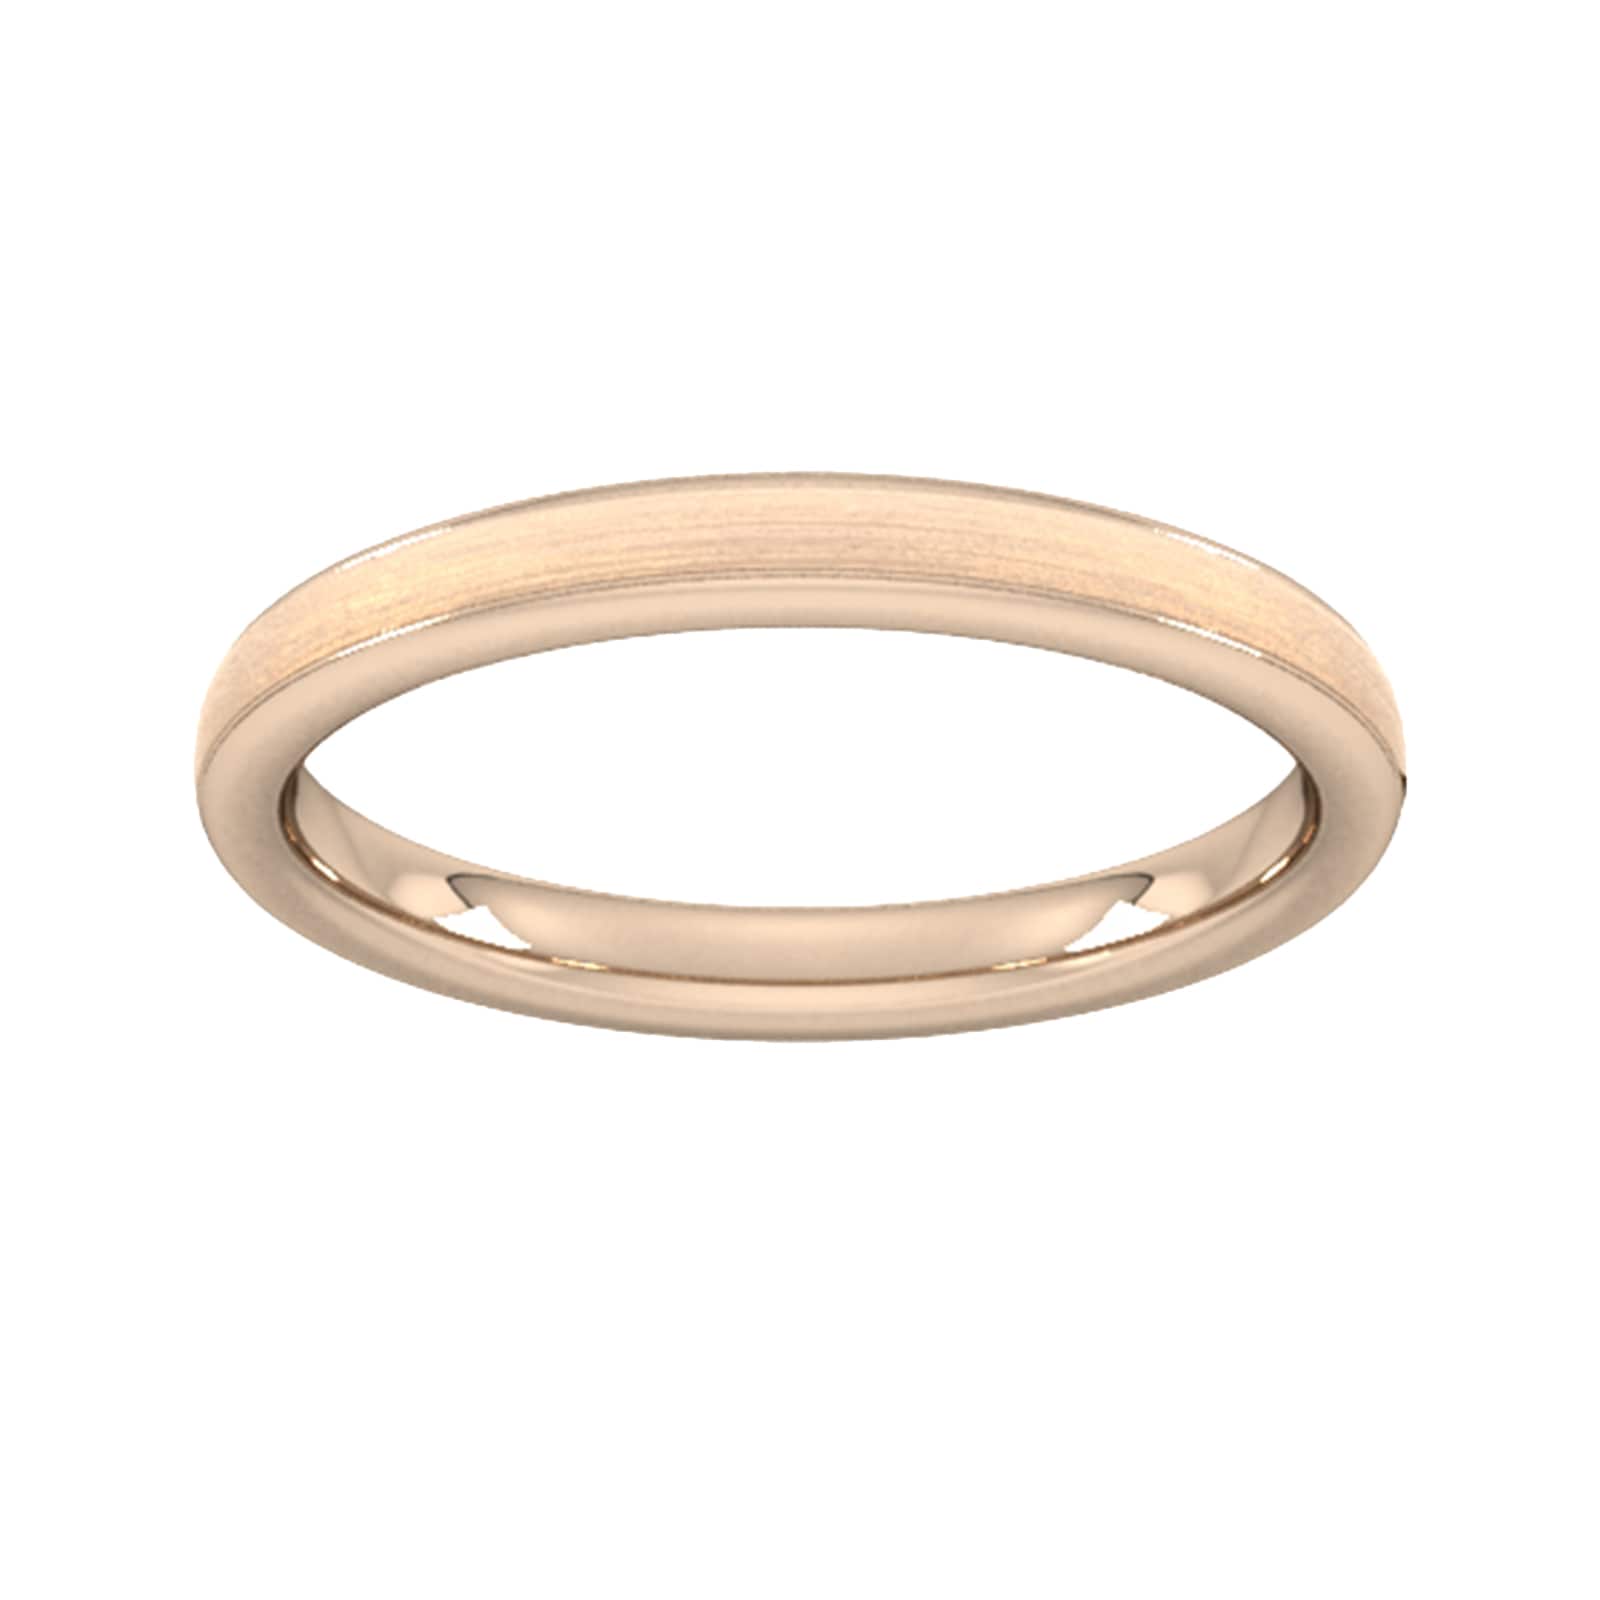 2.5mm Flat Court Heavy Matt Centre With Grooves Wedding Ring In 18 Carat Rose Gold - Ring Size S